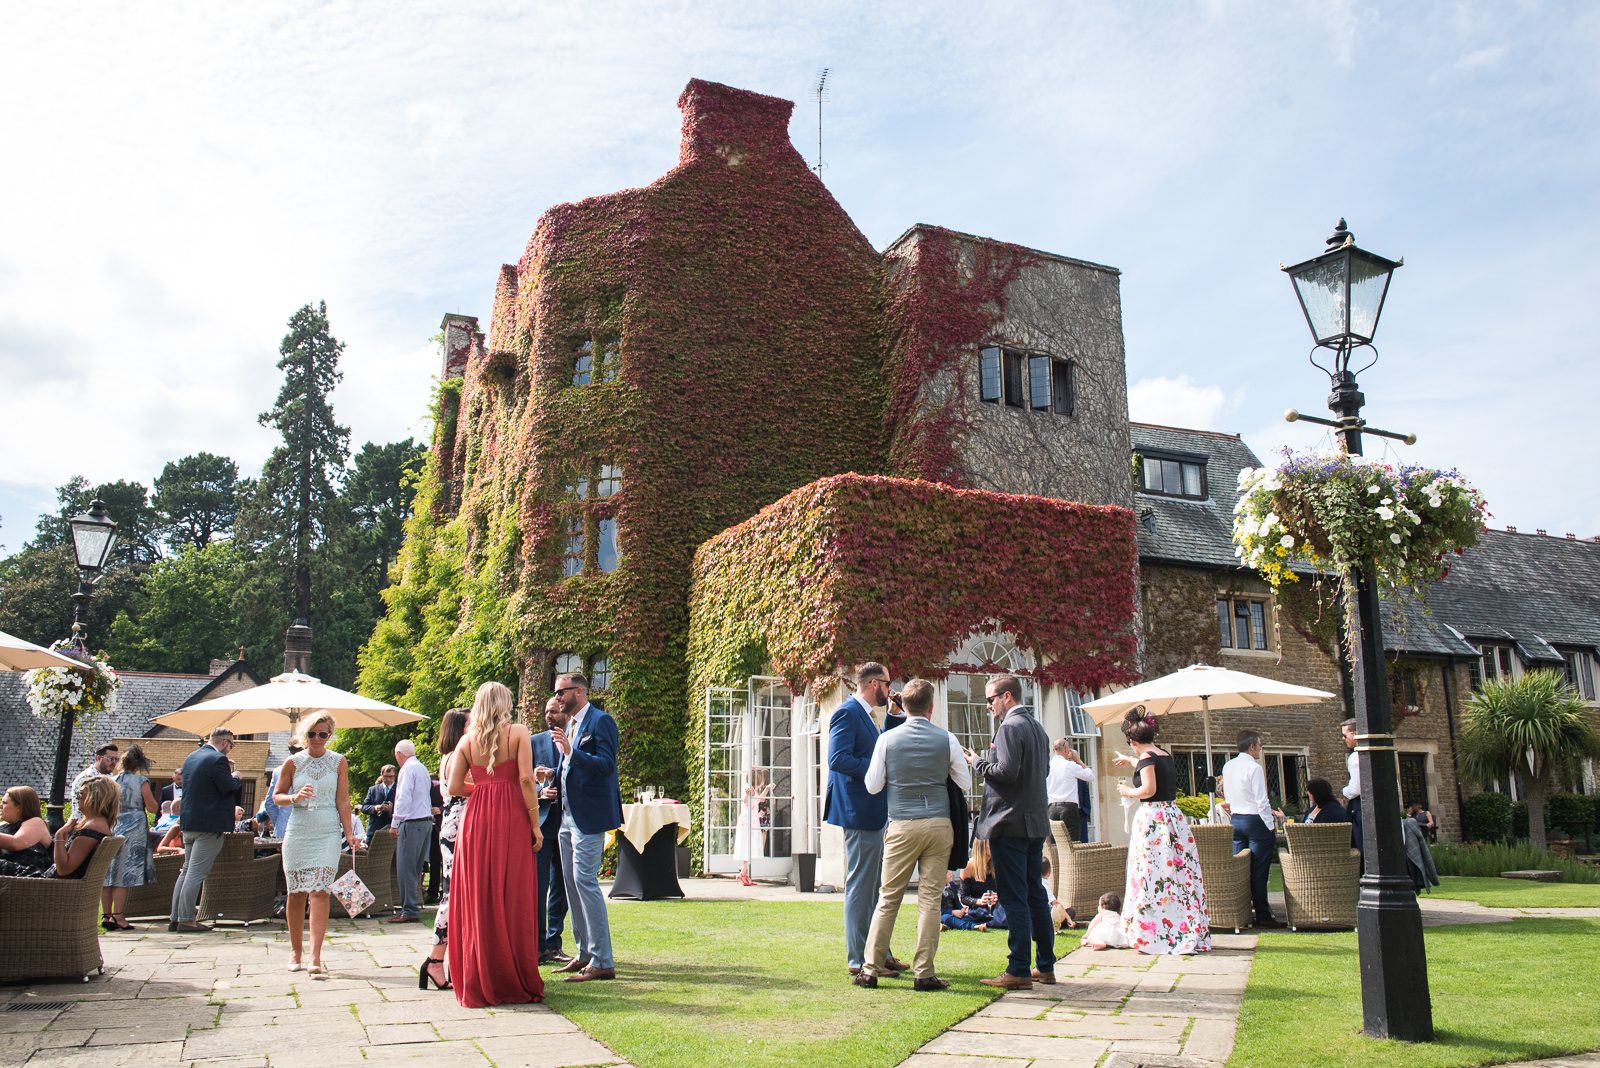 The outdoor terrace at Pennyhill park during a stylish Summer wedding.